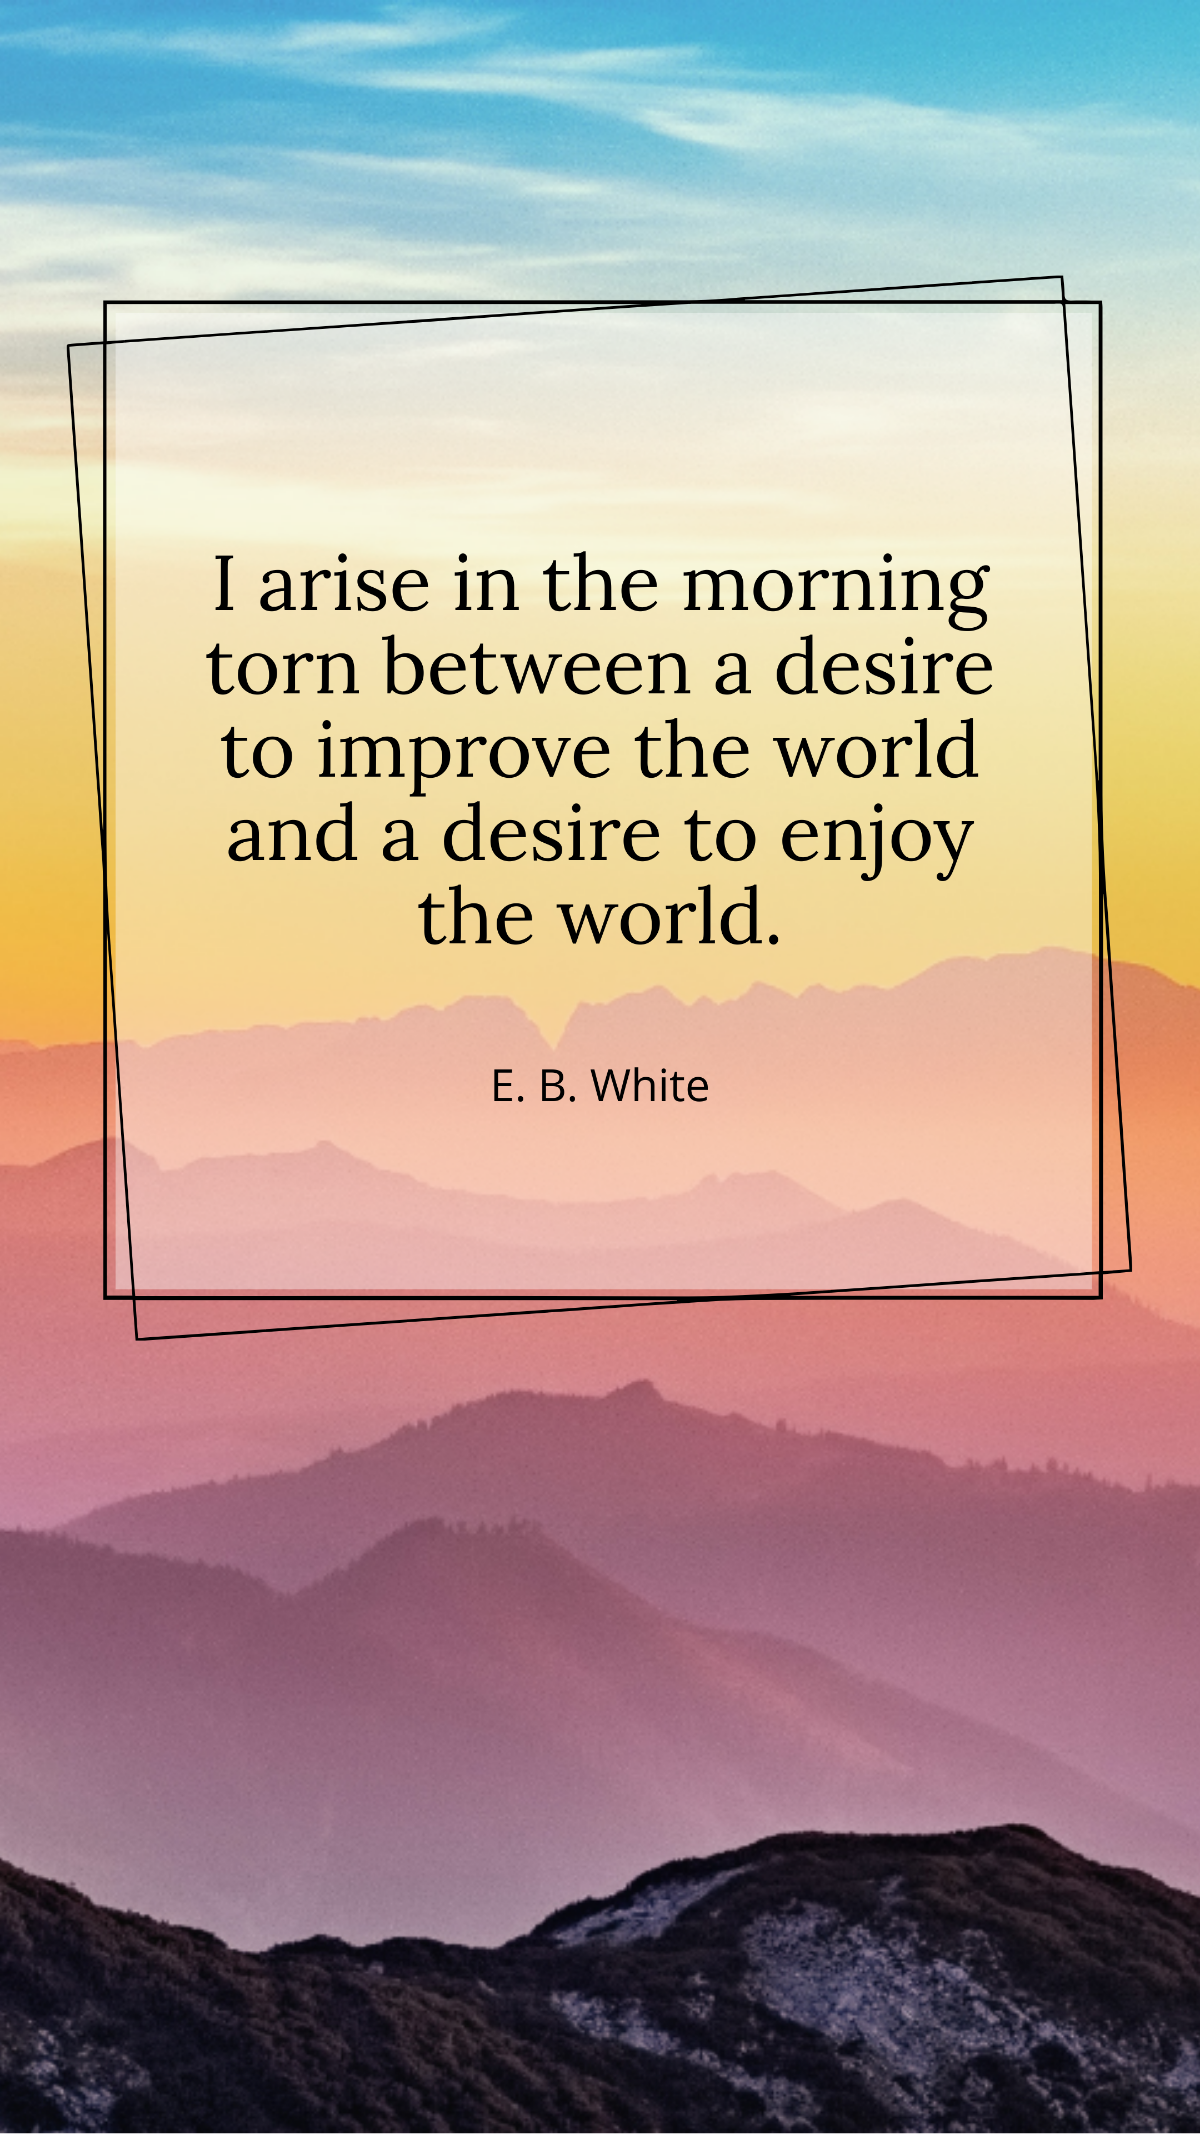 E. B. White - I arise in the morning torn between a desire to improve the world and a desire to enjoy the world. Template